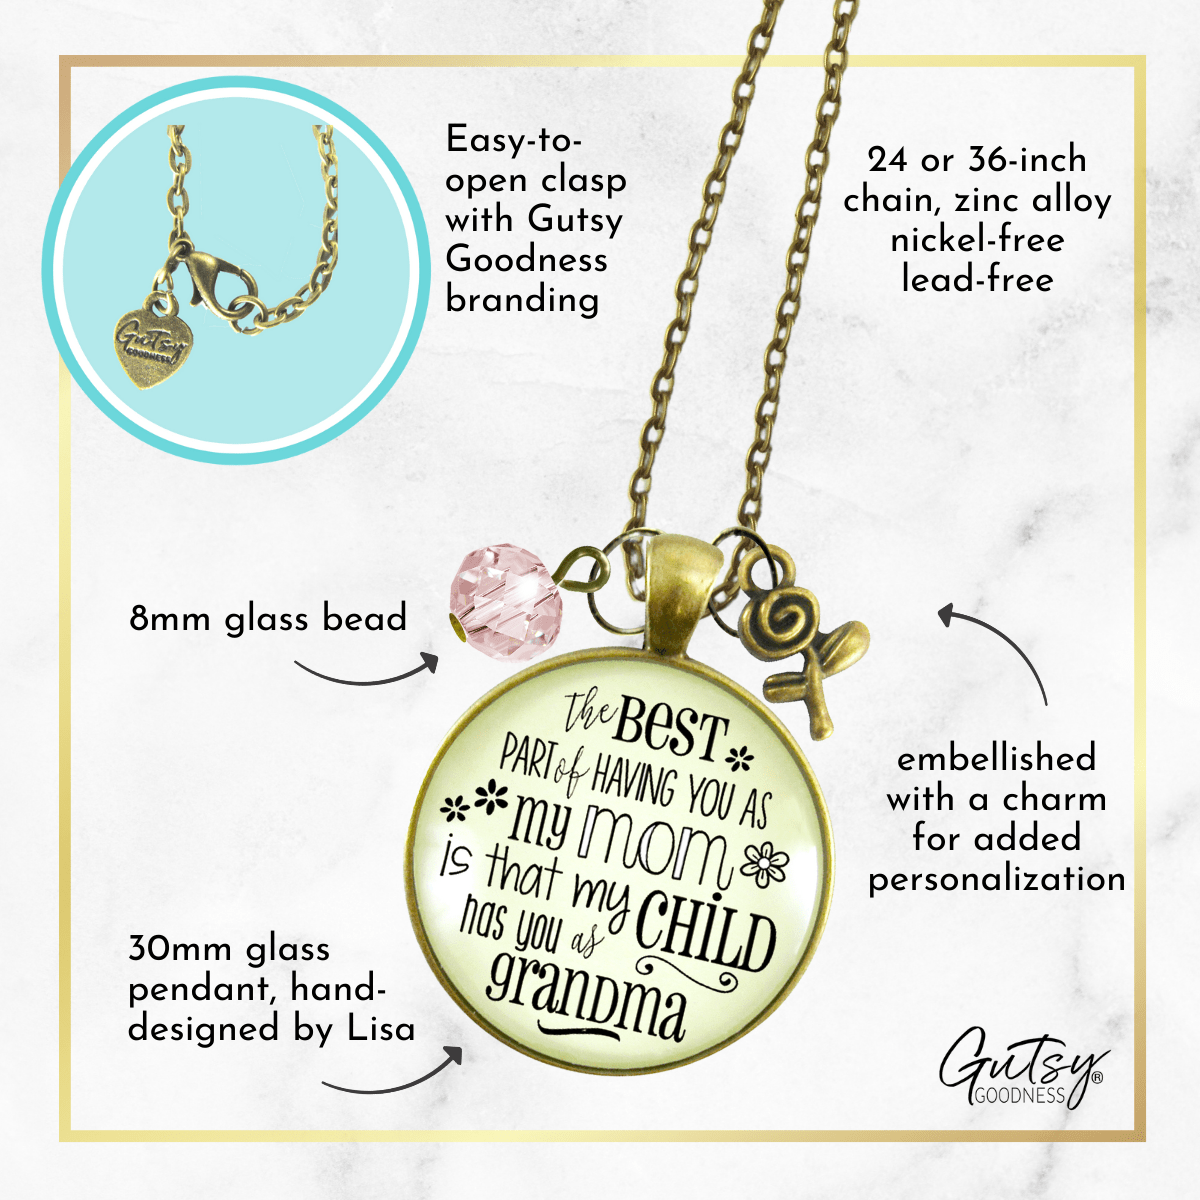 Gutsy Goodness Grandma Necklace Best Part You as Mom Child Jewelry Gift Daughter - Gutsy Goodness Handmade Jewelry;Grandma Necklace Best Part You As Mom Child Jewelry Gift Daughter - Gutsy Goodness Handmade Jewelry Gifts